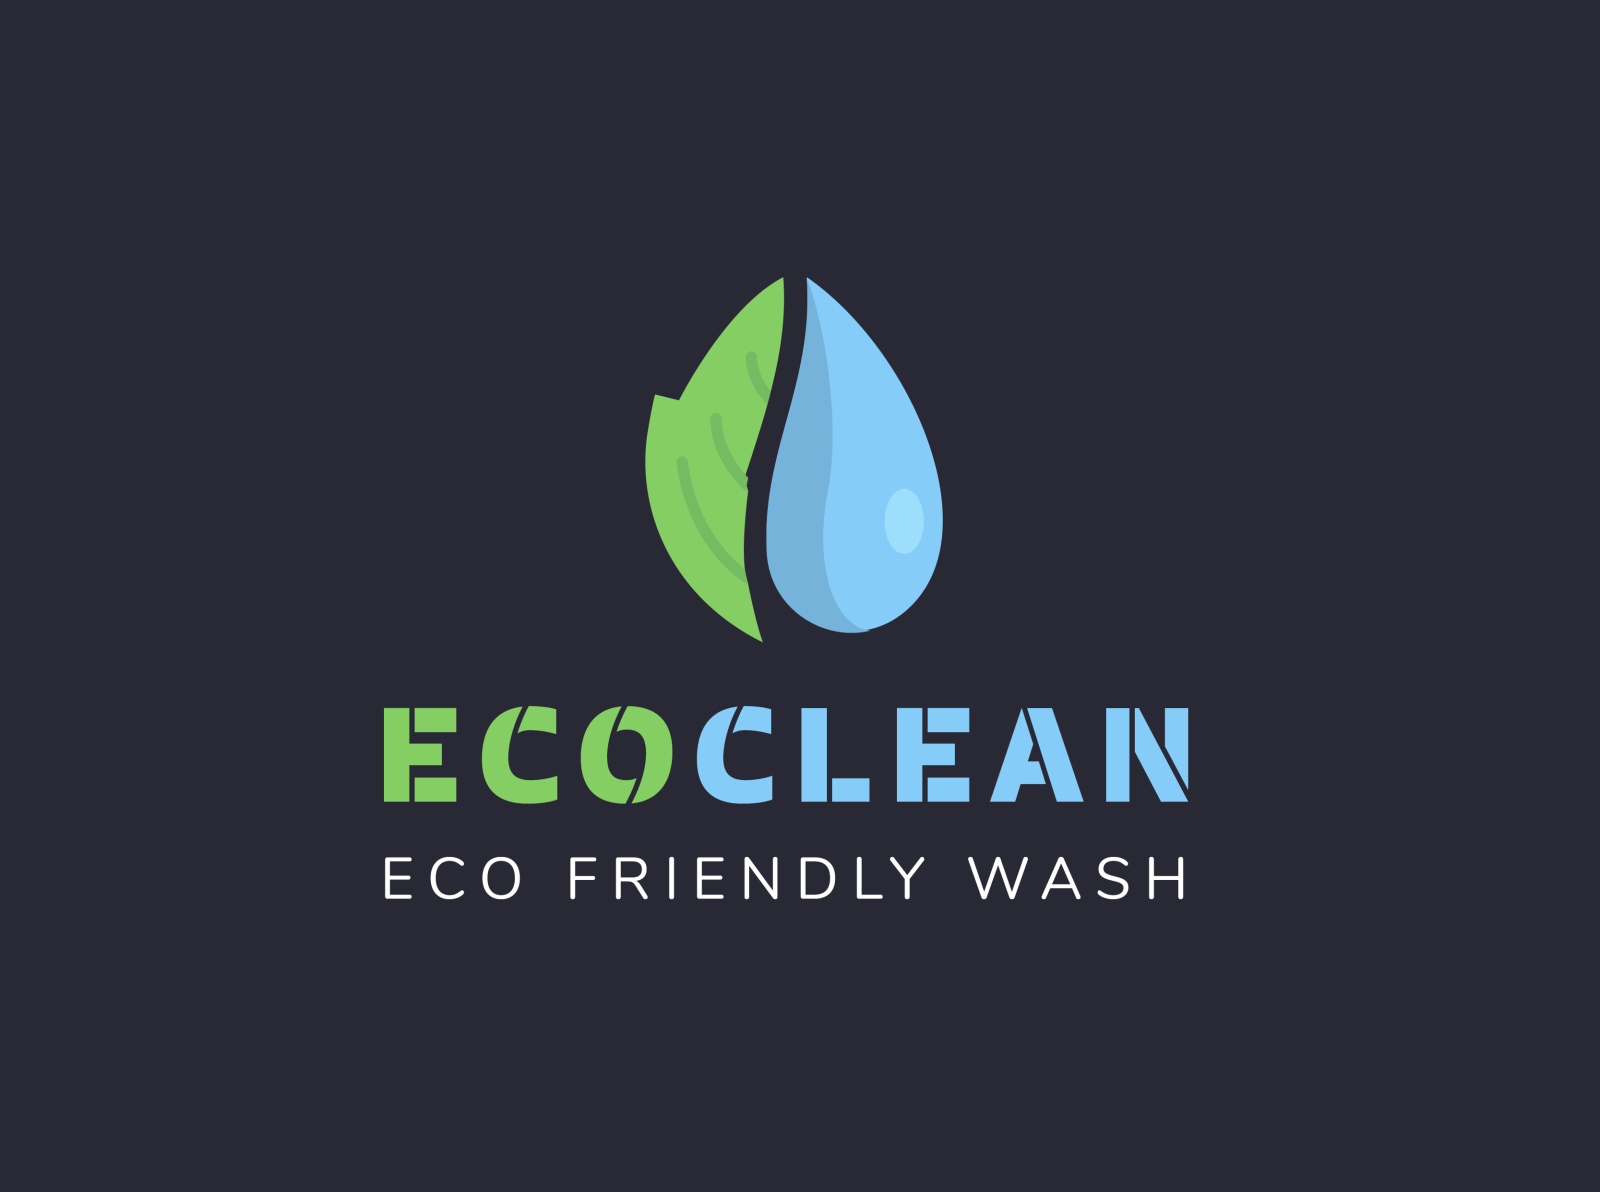 ECOCLEAN by Logo.Bot on Dribbble